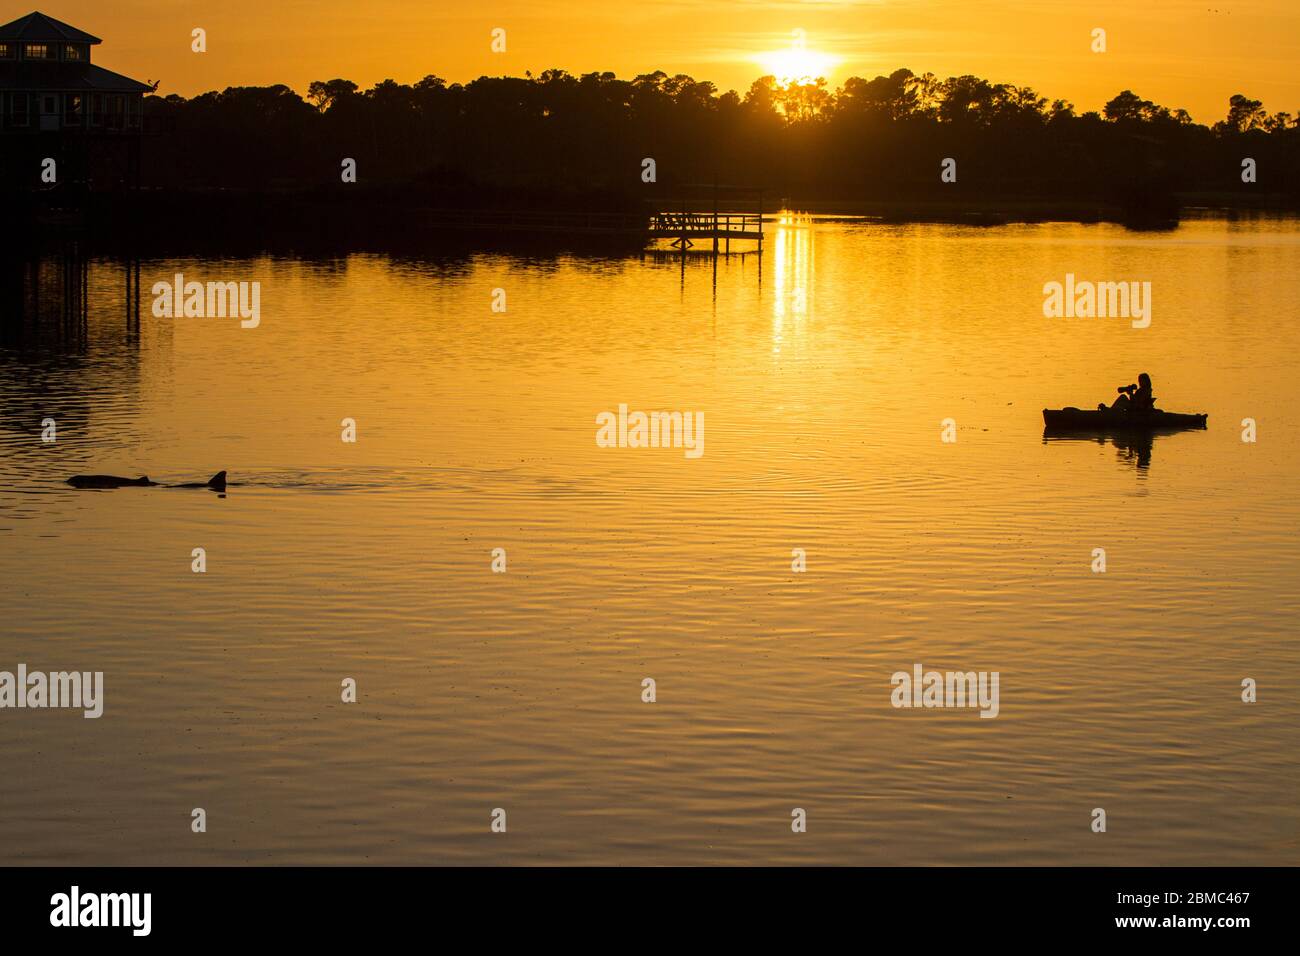 Kayaking at sunset with a bottle nosed dolphin Stock Photo